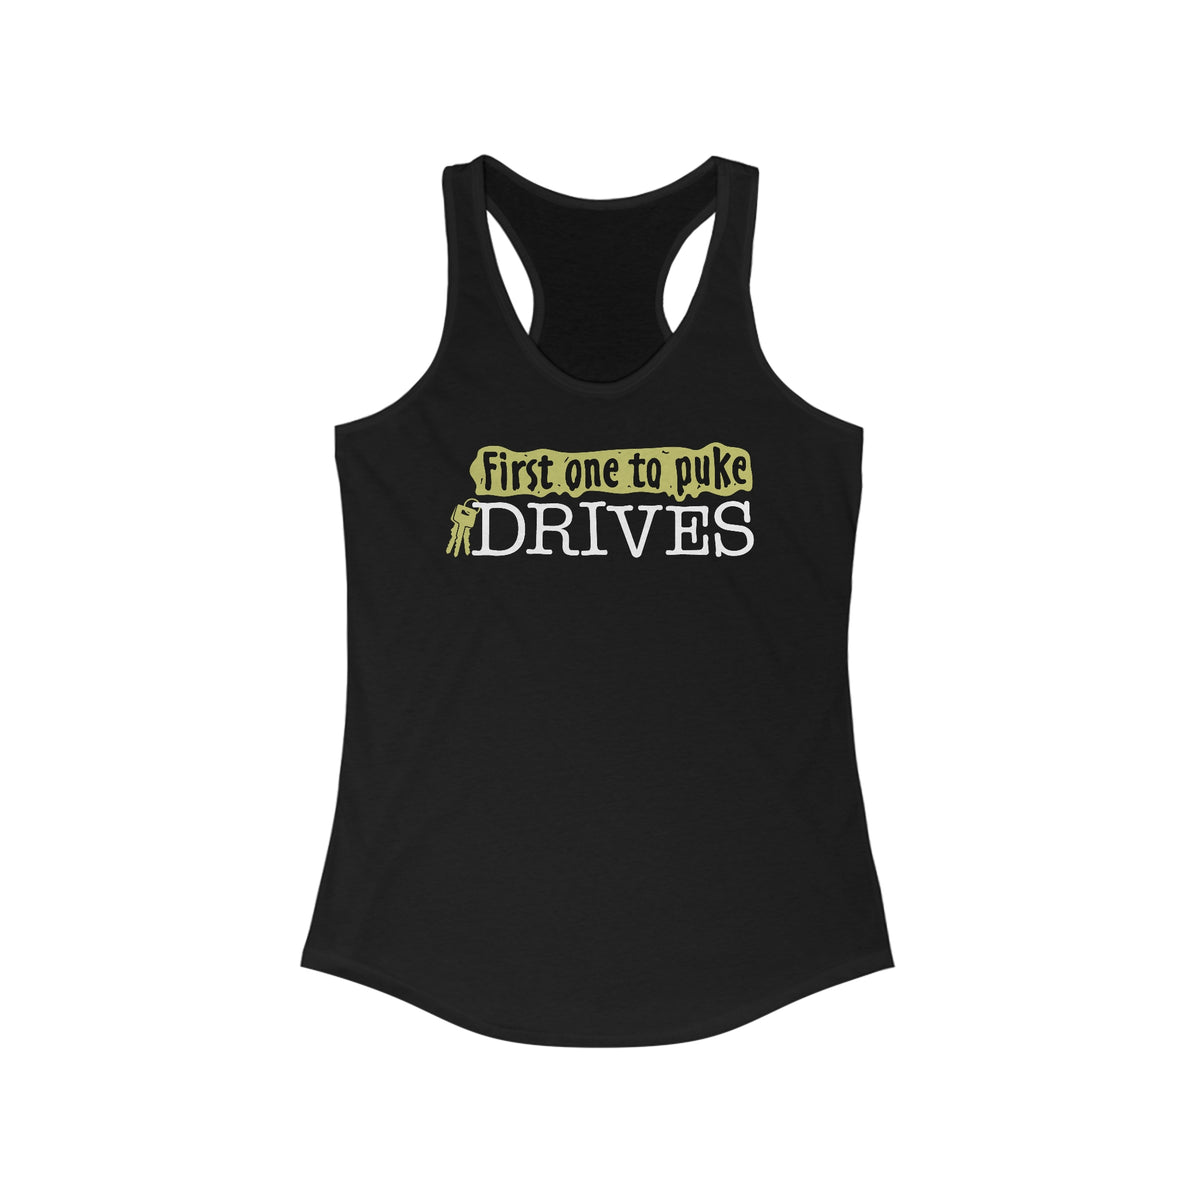 First One To Puke Drives - Women’s Racerback Tank